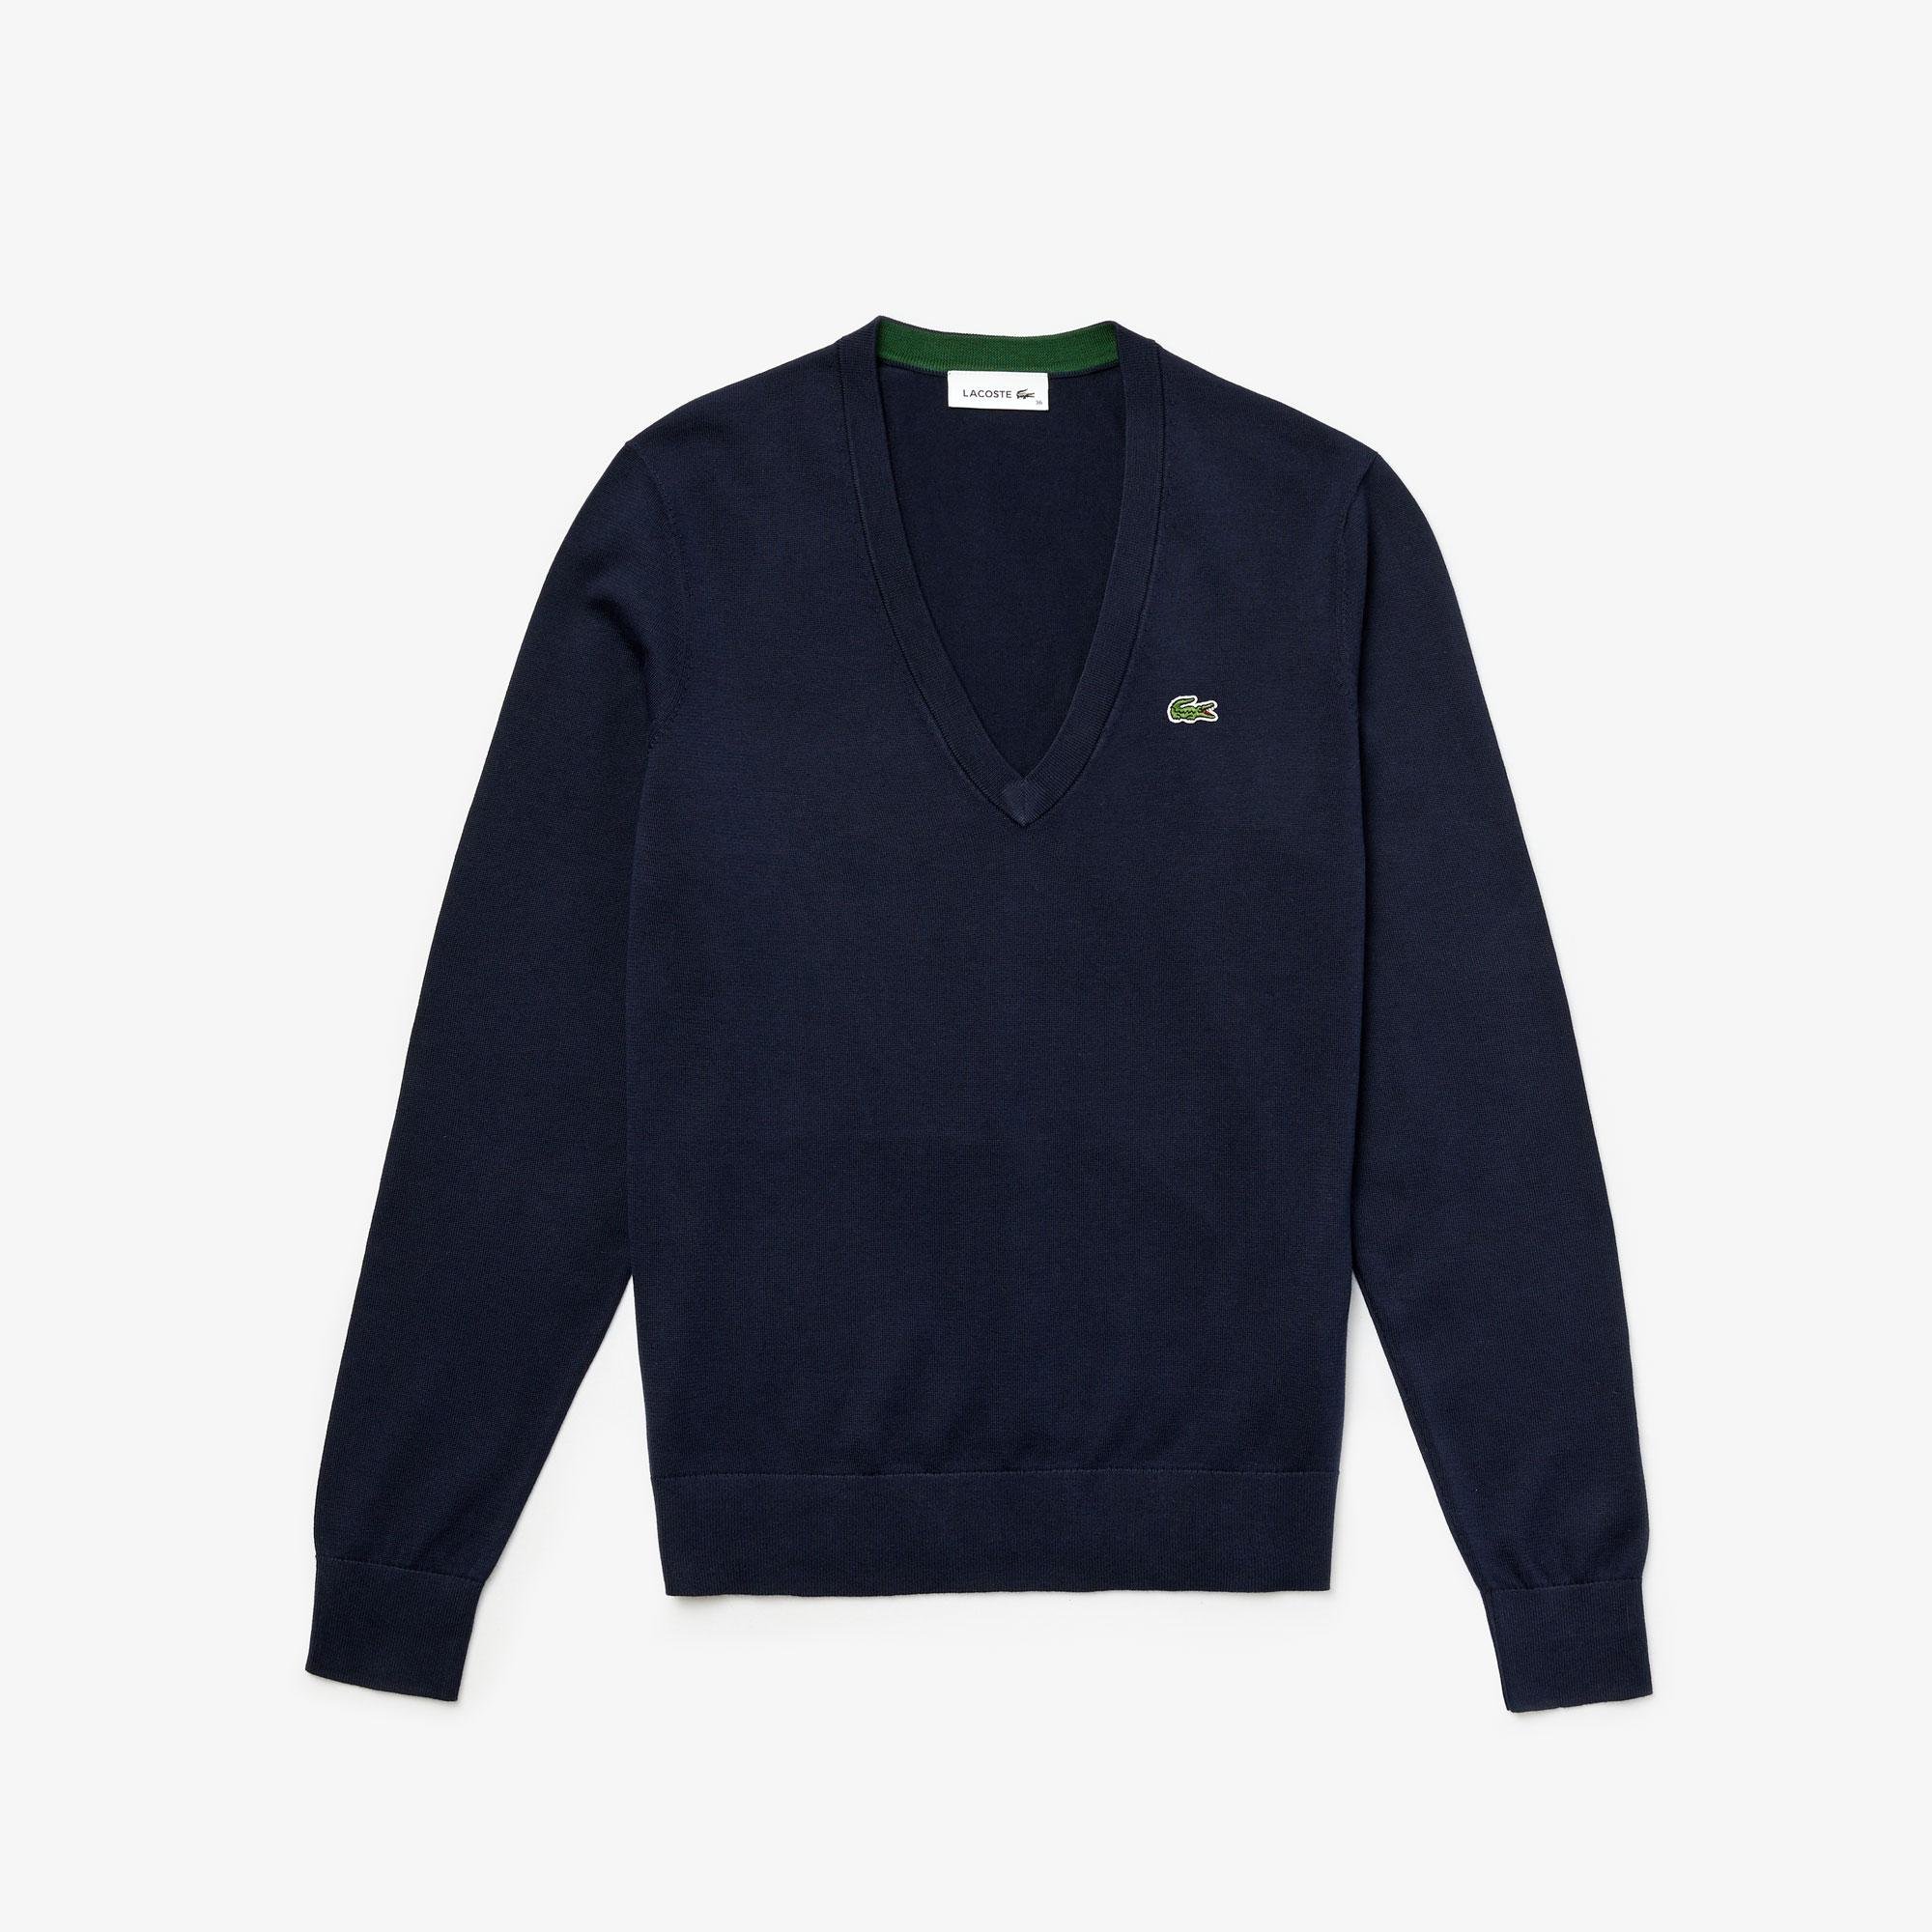 Lacoste Women's Solid Cotton V-Neck Sweater